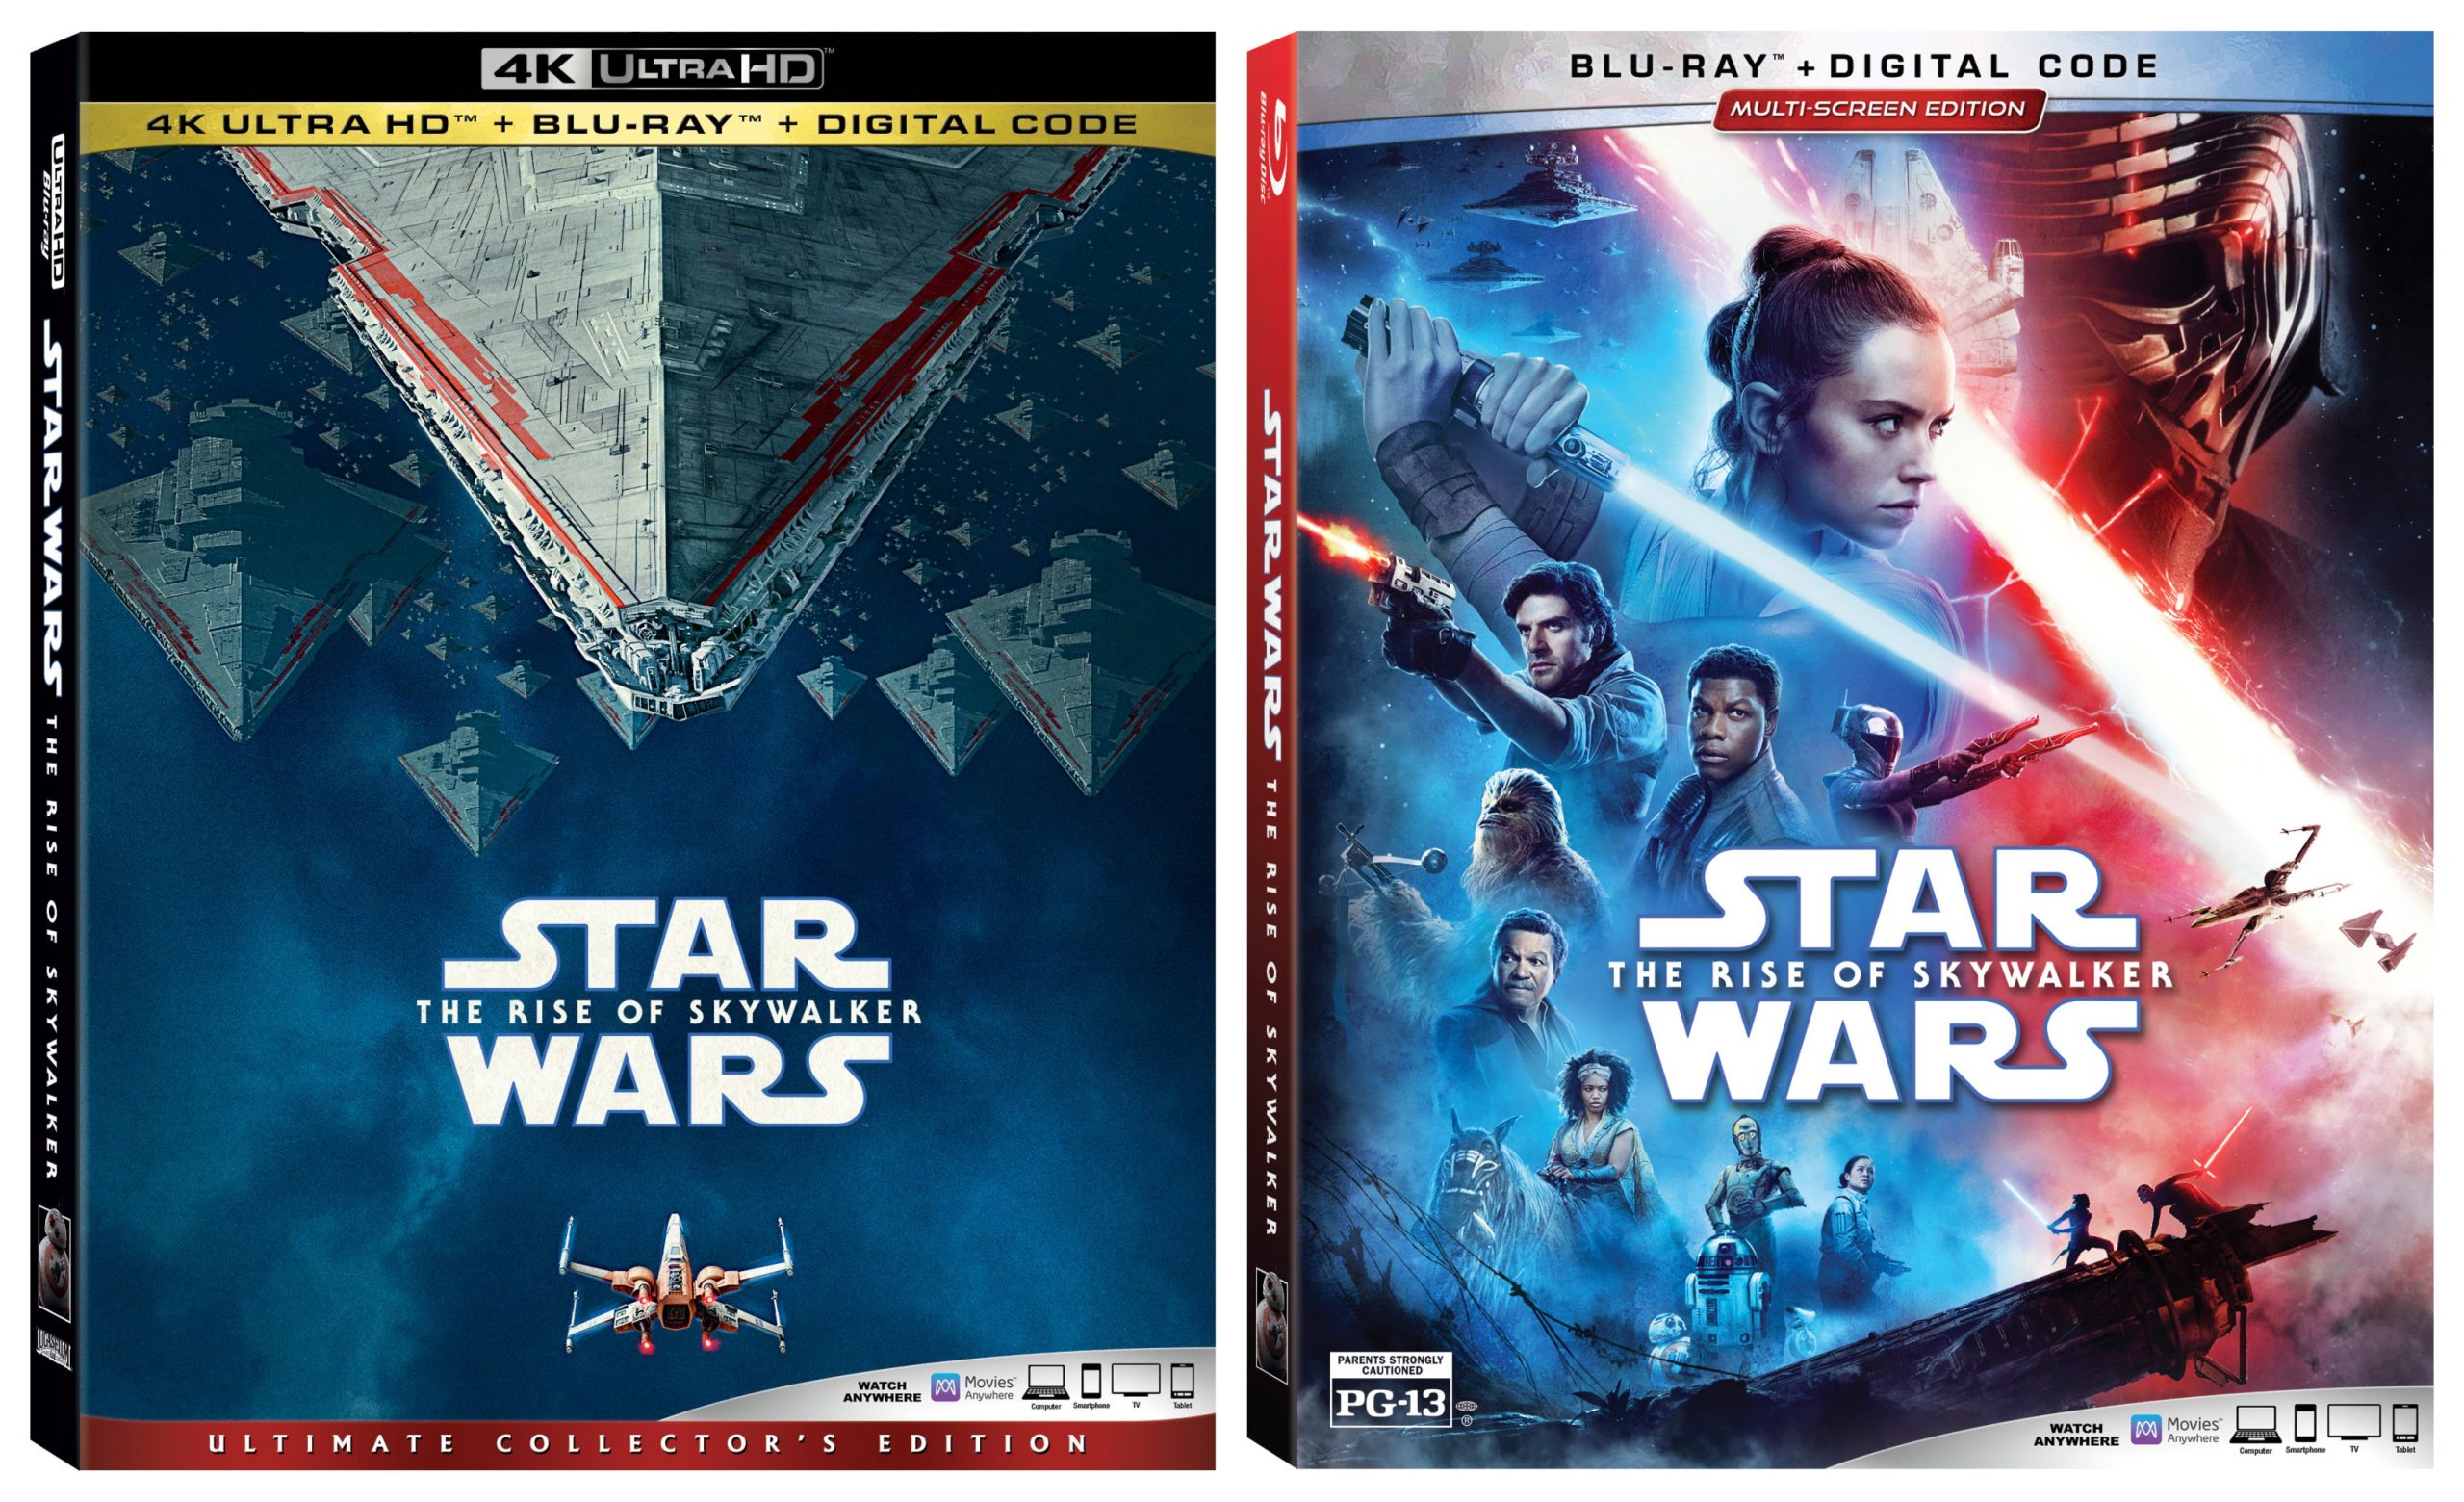 Star Wars: The Rise of Skywalker on Digital 3/17 and Blu-ray 3/31